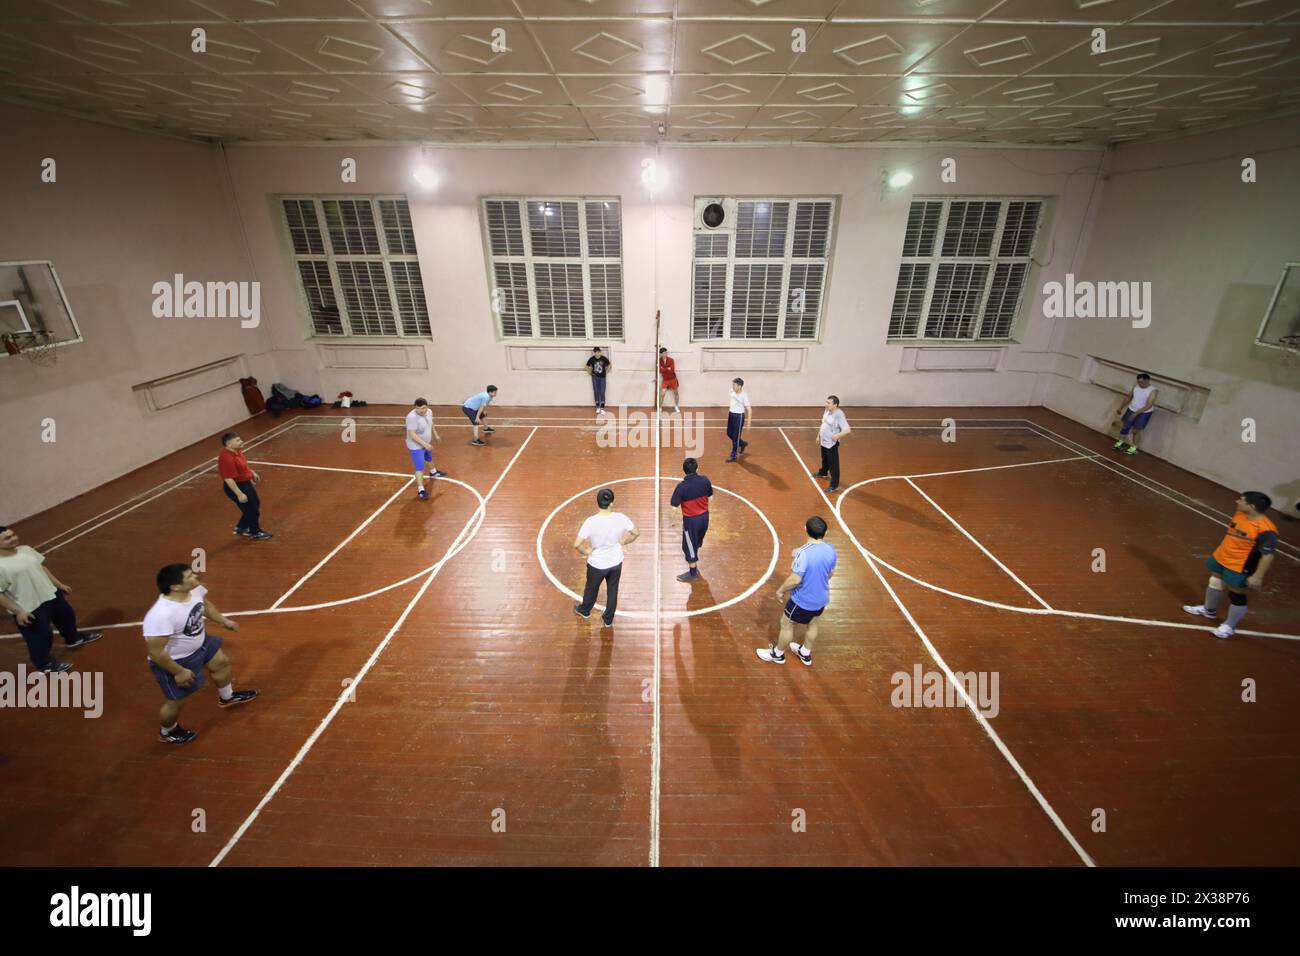 MOSCOW - FEB 9, 2017: People play volleyball in gym in Dobrynya boxing club Stock Photo